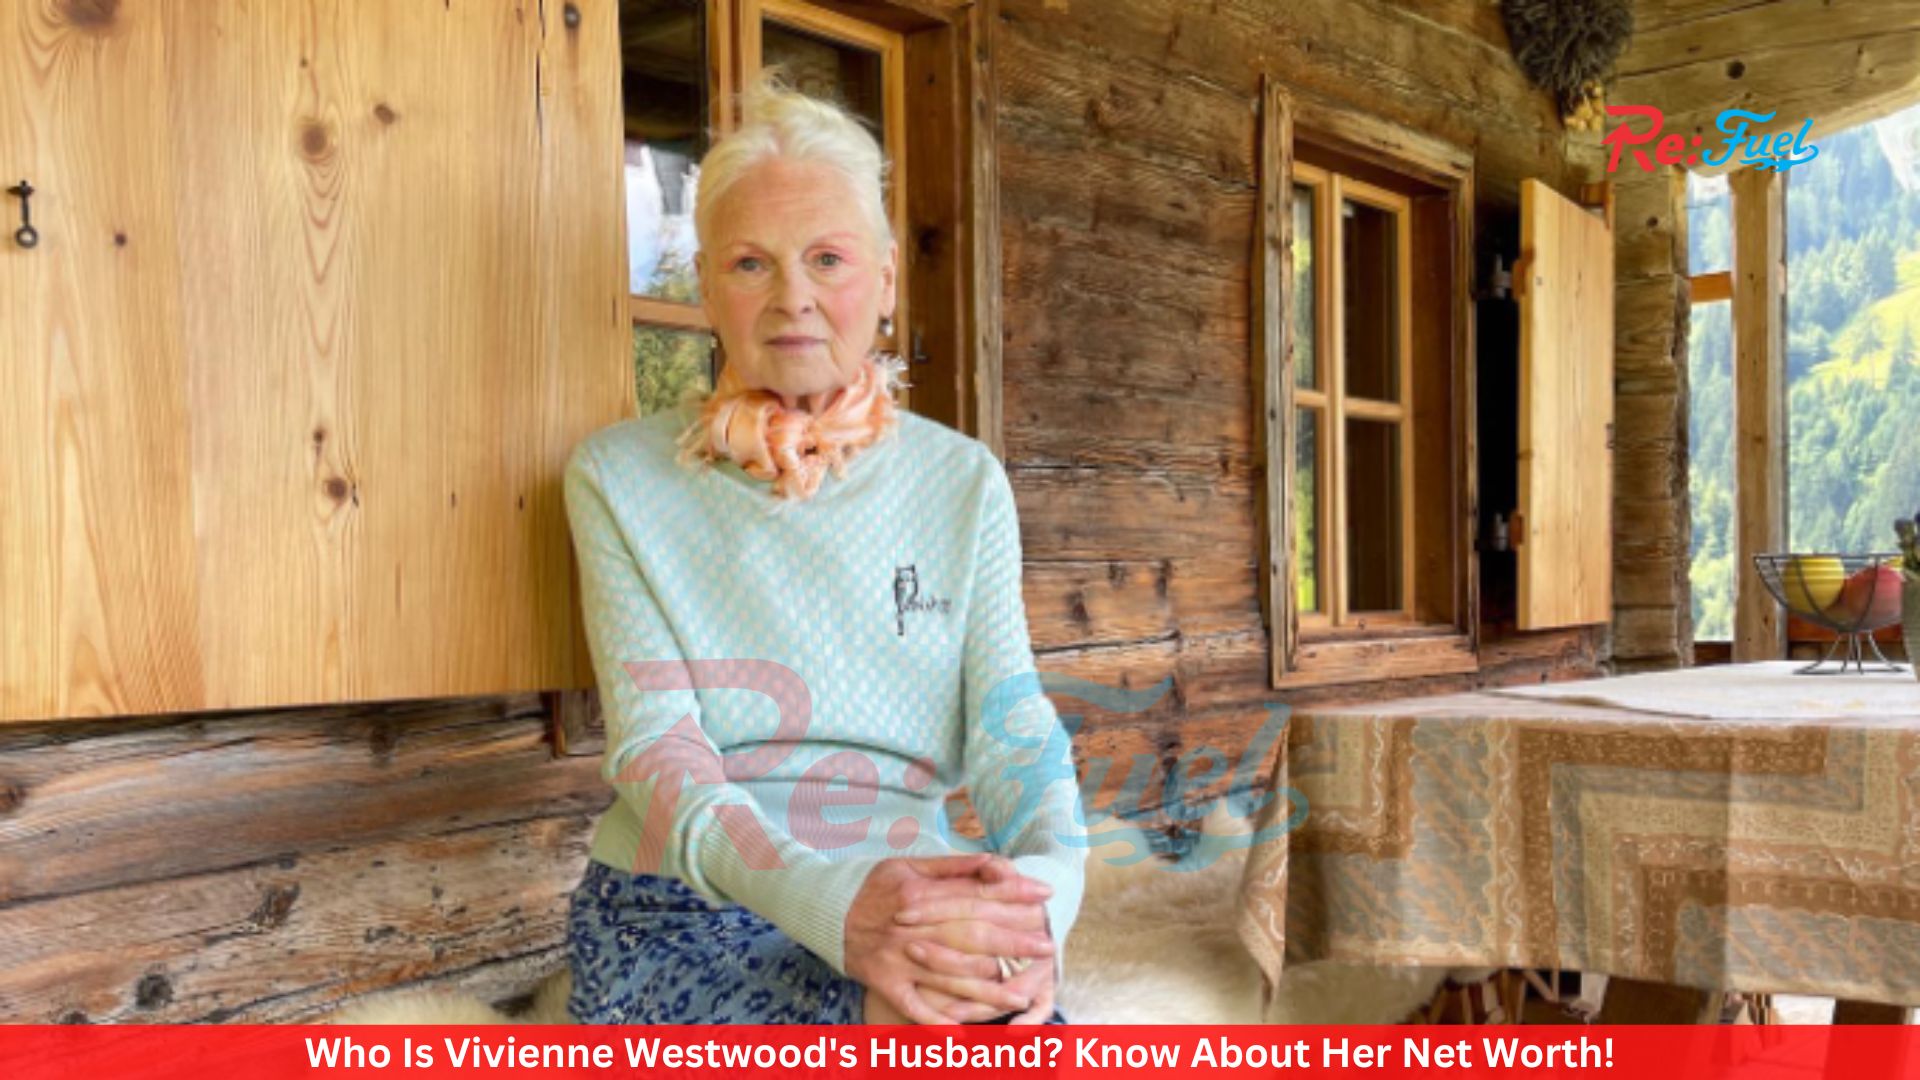 Who Is Vivienne Westwood's Husband? Know About Her Net Worth!